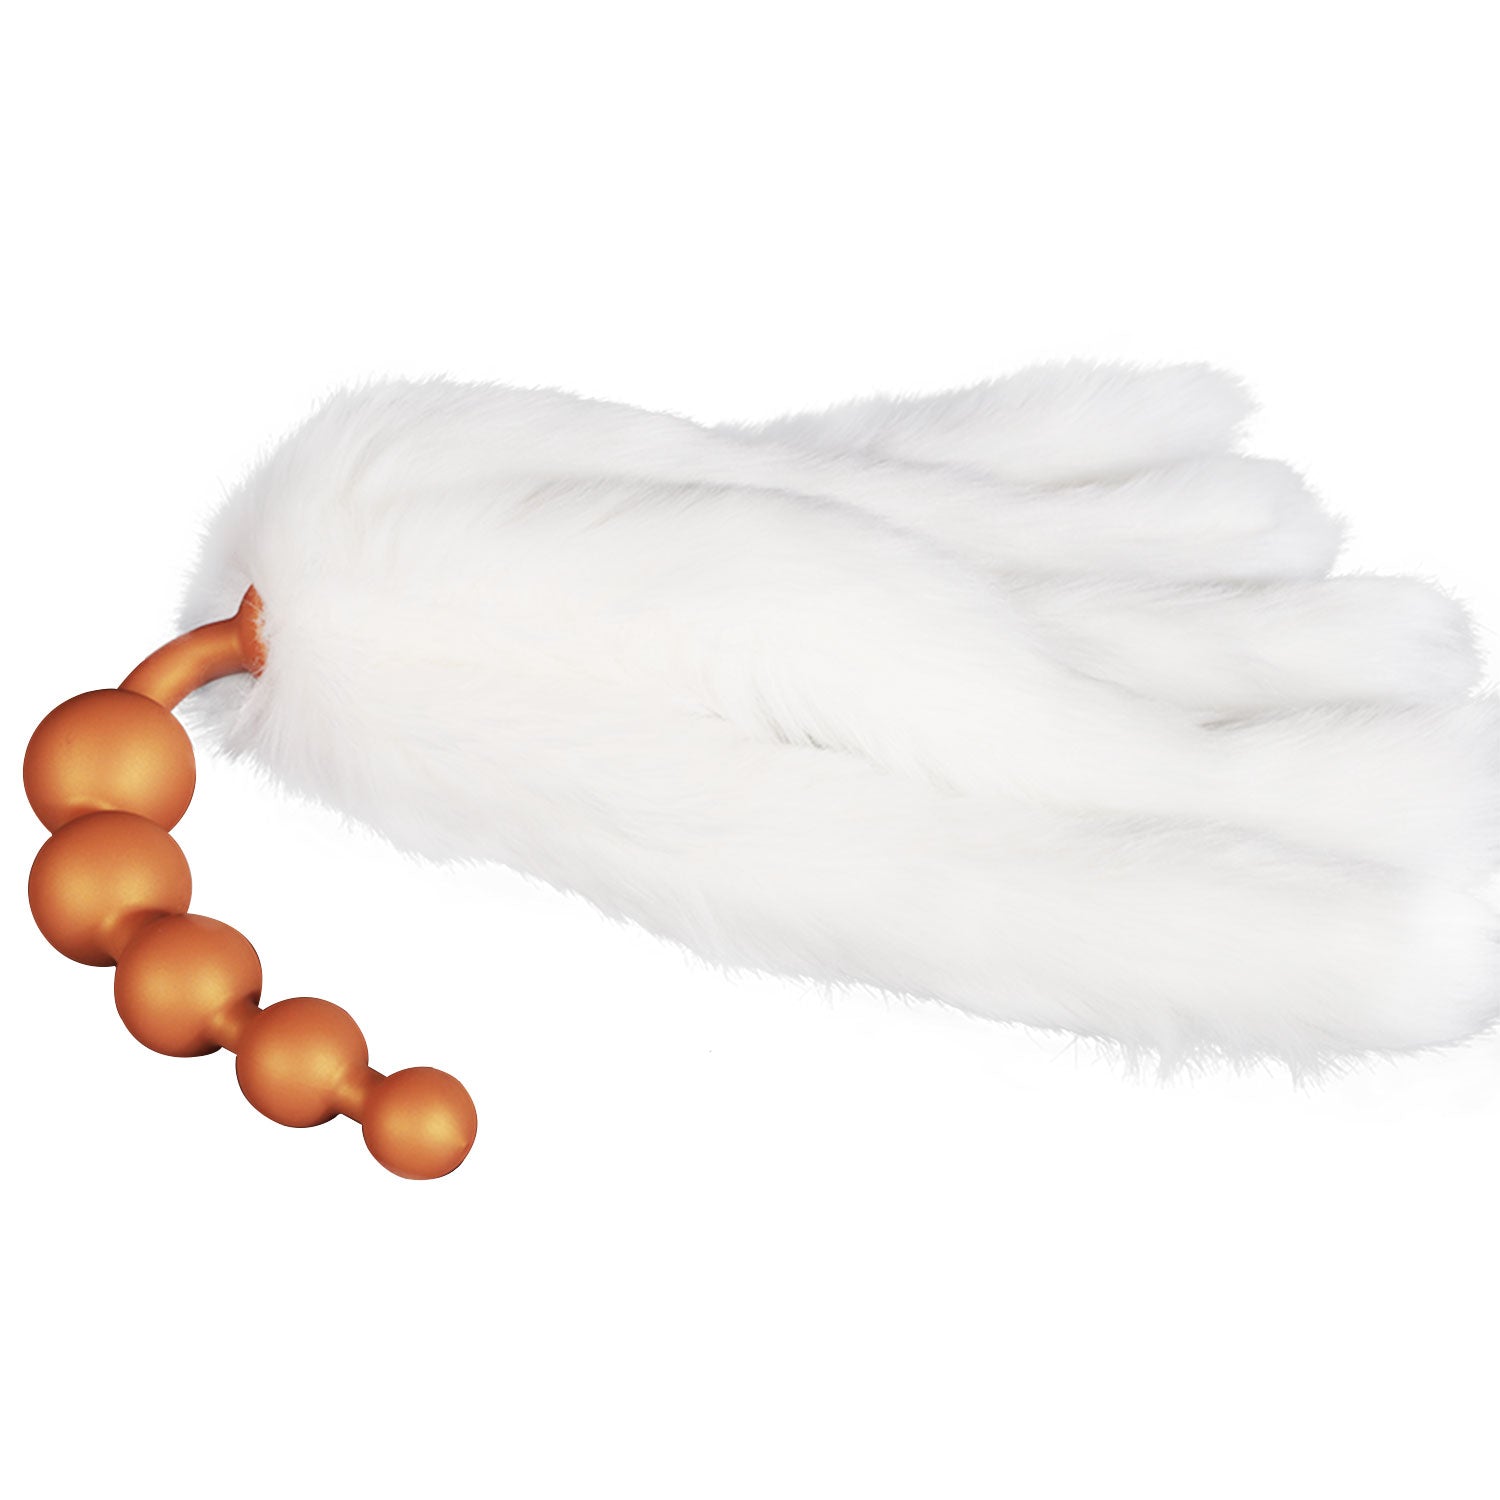 Soft Silicone Anal Beads - Different Sizes  5 Anal Balls - Fox Tail Anal Plug